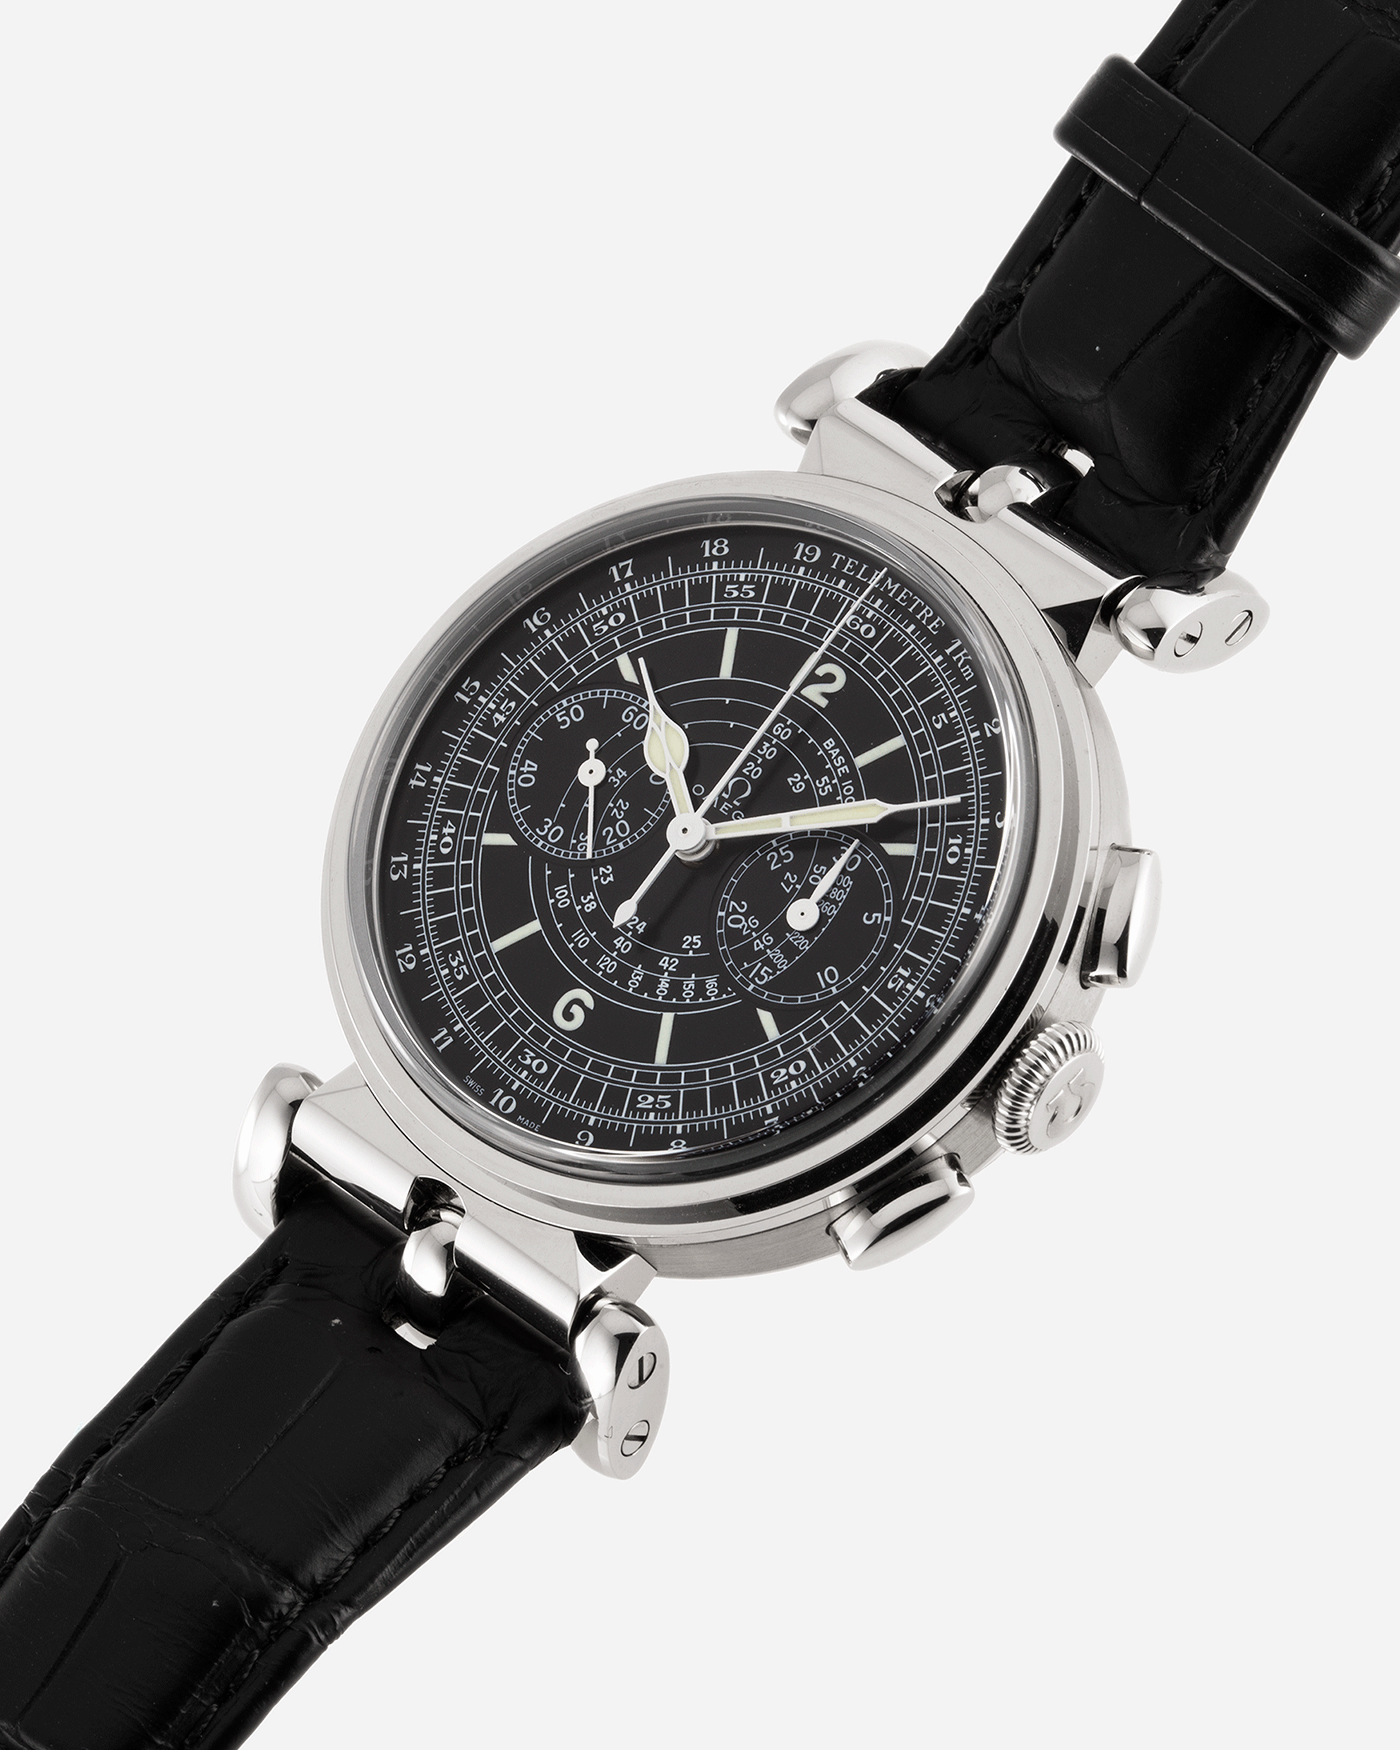 Brand: Omega Year: 2009 Model: Milestone Museum Collection 1941 Officer’s Chronograph Material: 18k White Gold Movement: Manual Winding Omega in-house 3203 Case Diameter: 38.1mm wide 12mm thick Strap: Black Omega Alligator Strap with 18k White Gold Omega Tang Buckle